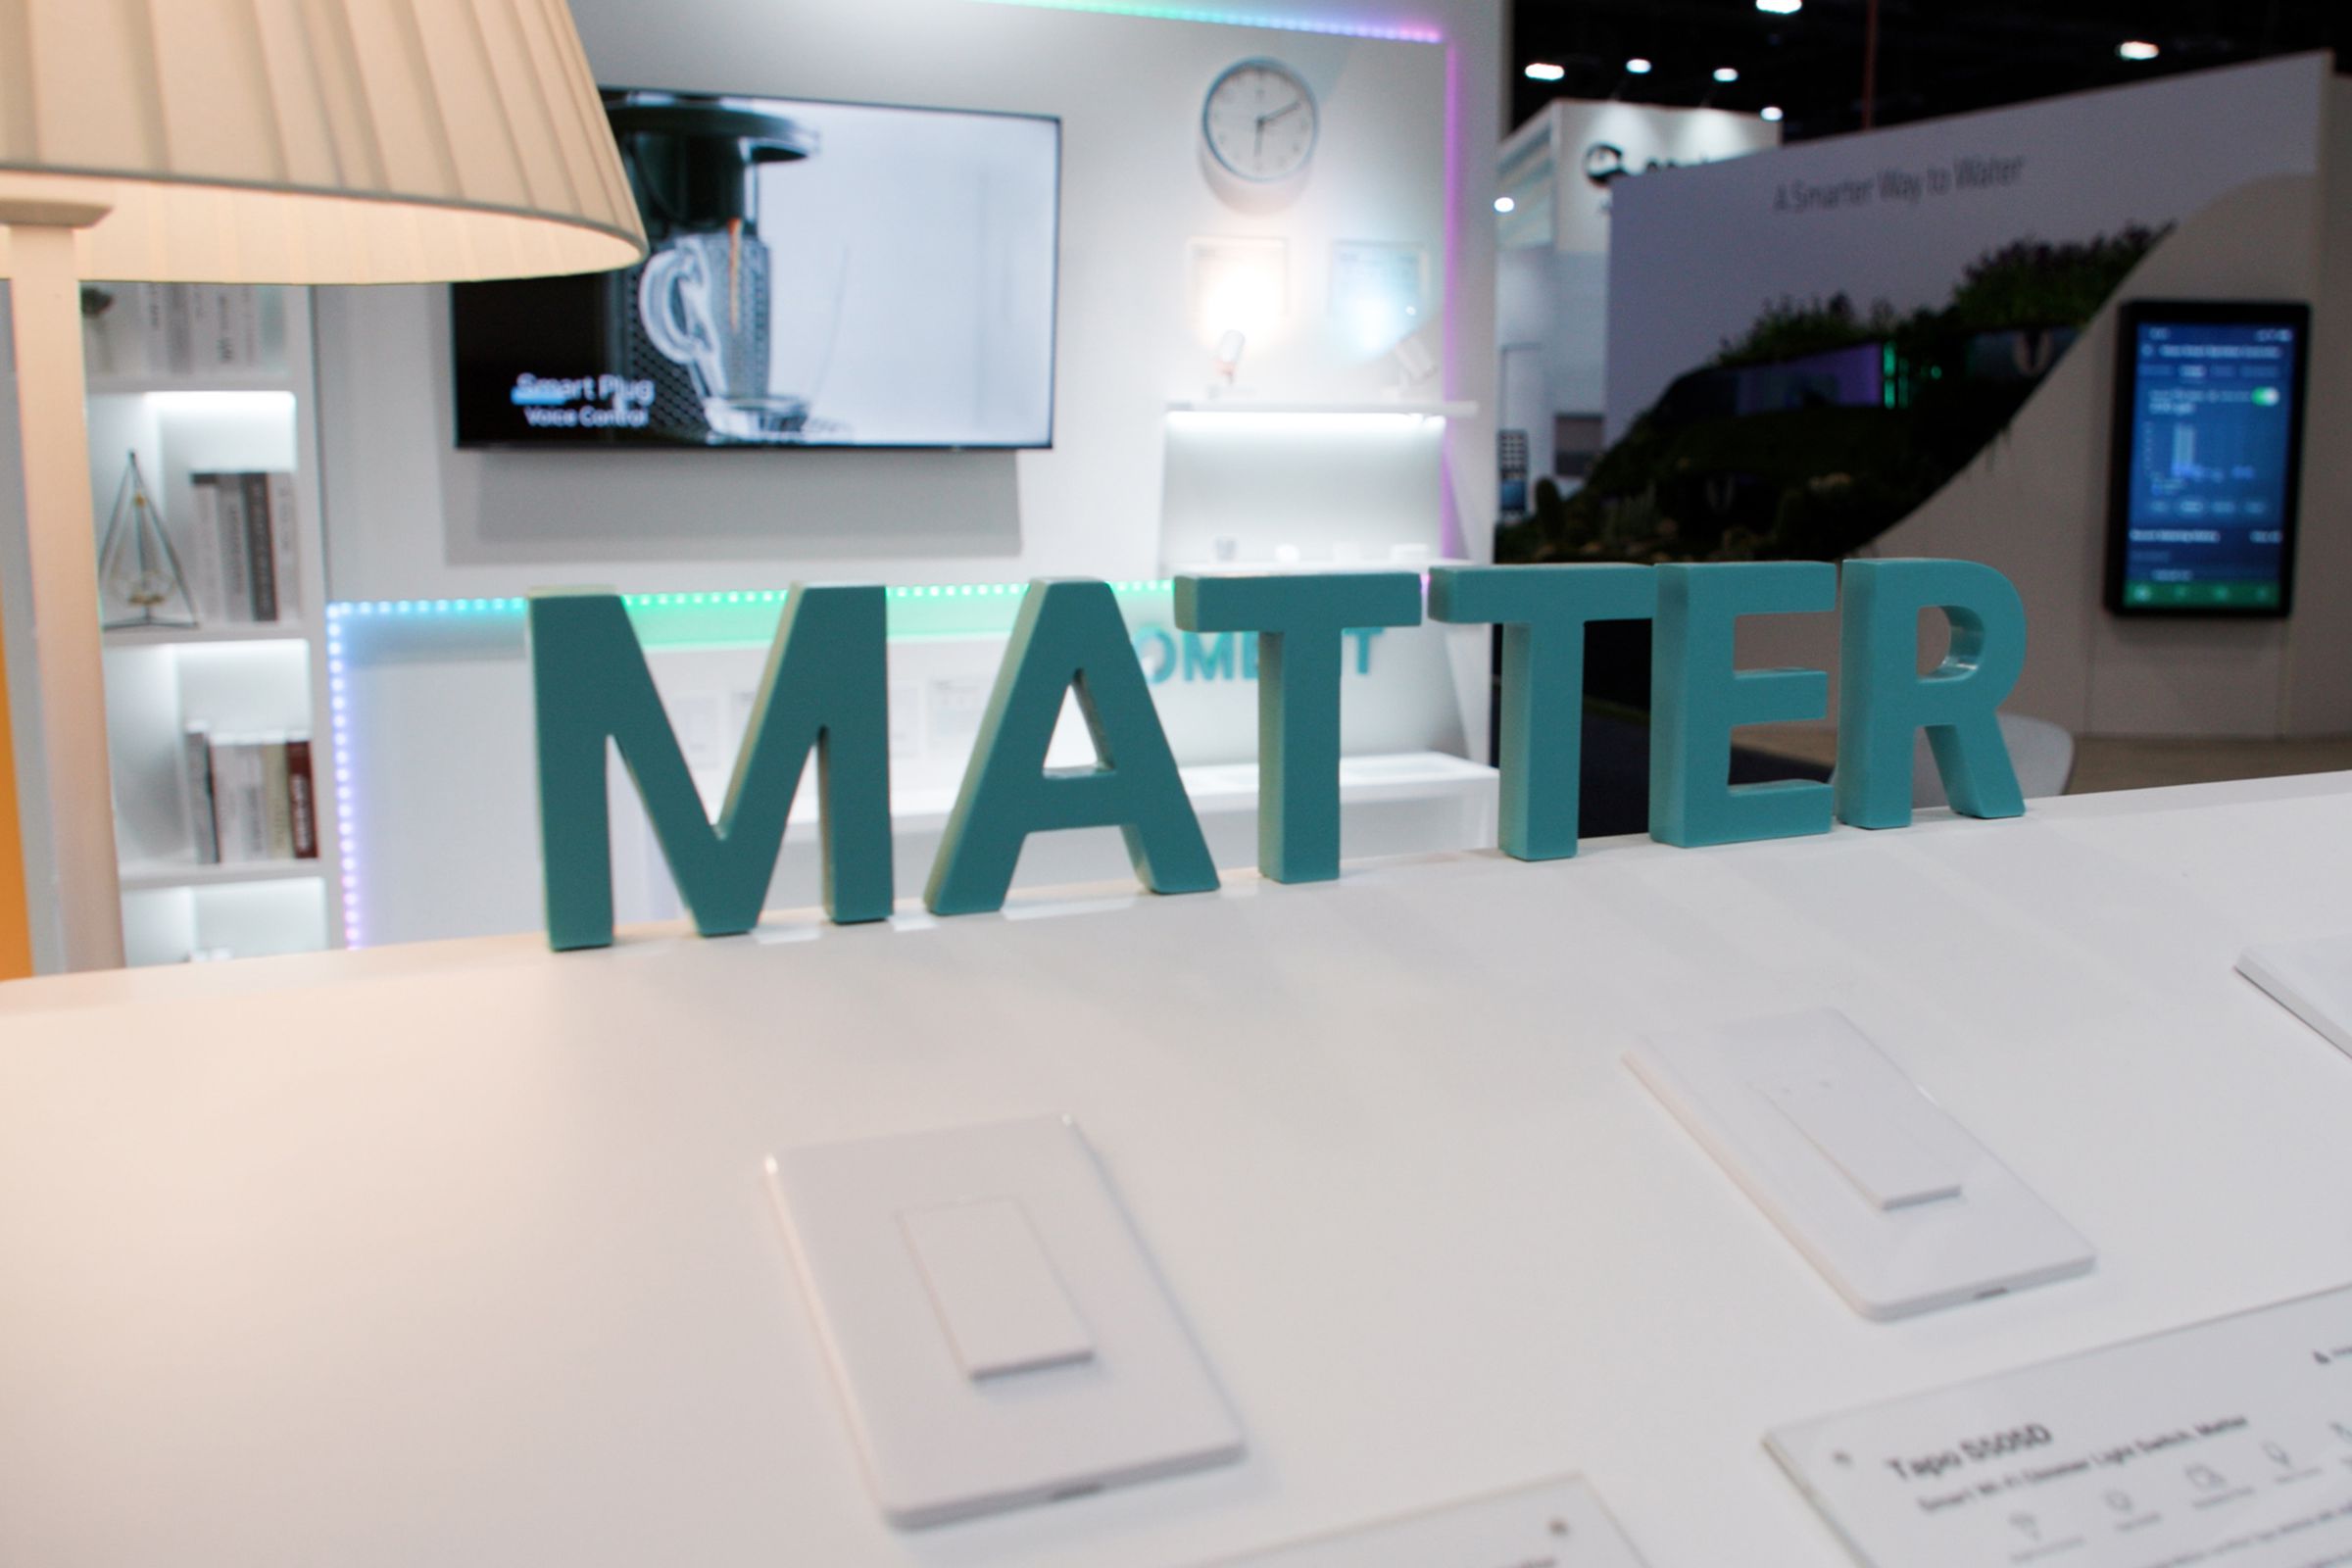 A green Matter sign above smart switches in a booth on the trade show floor.